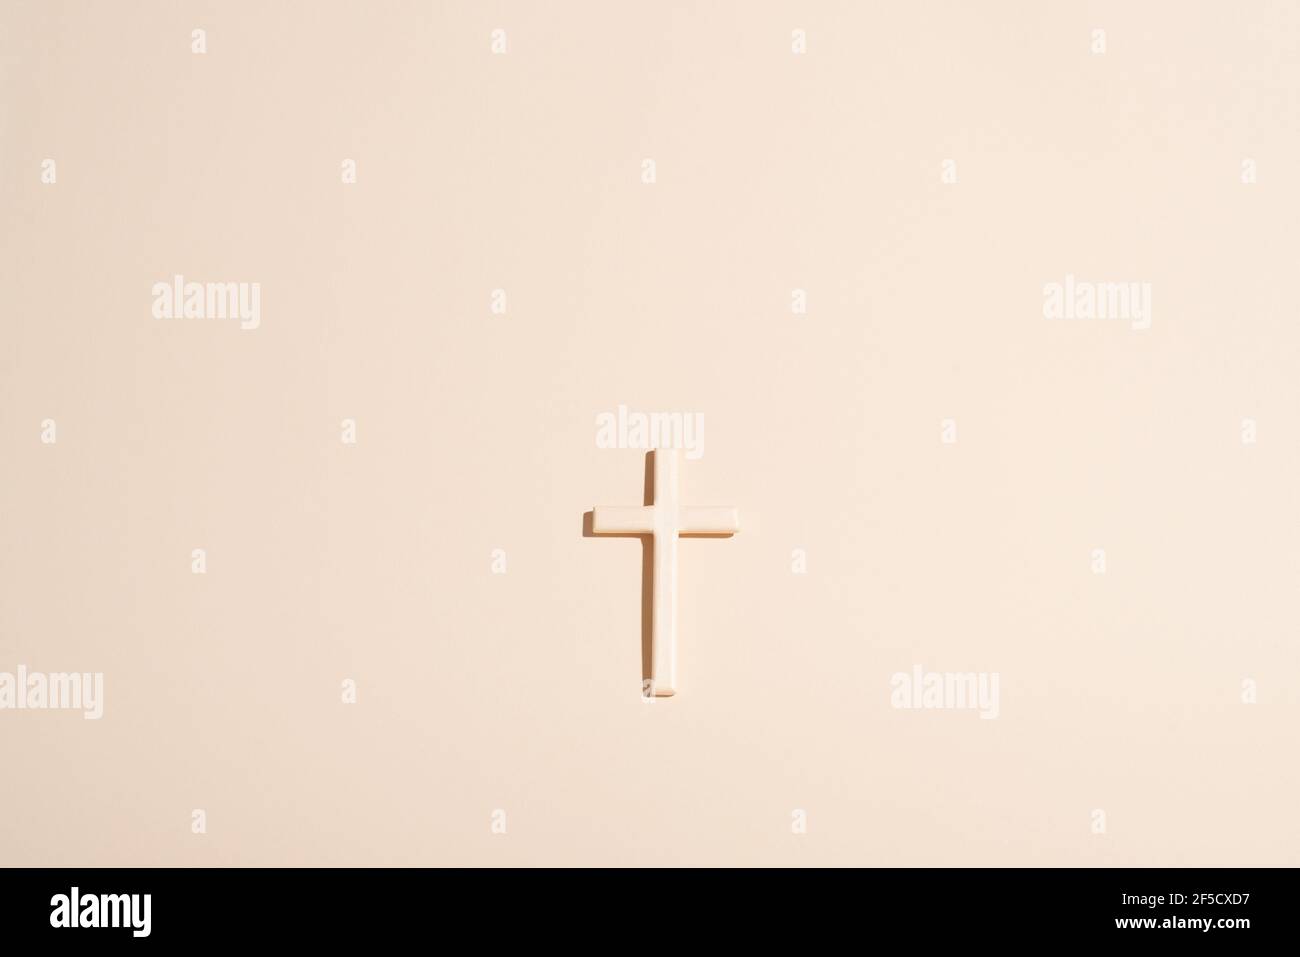 Cross or crucifix on light beige background. Clean simplistic design. Flat lay. Copy space. Stock Photo